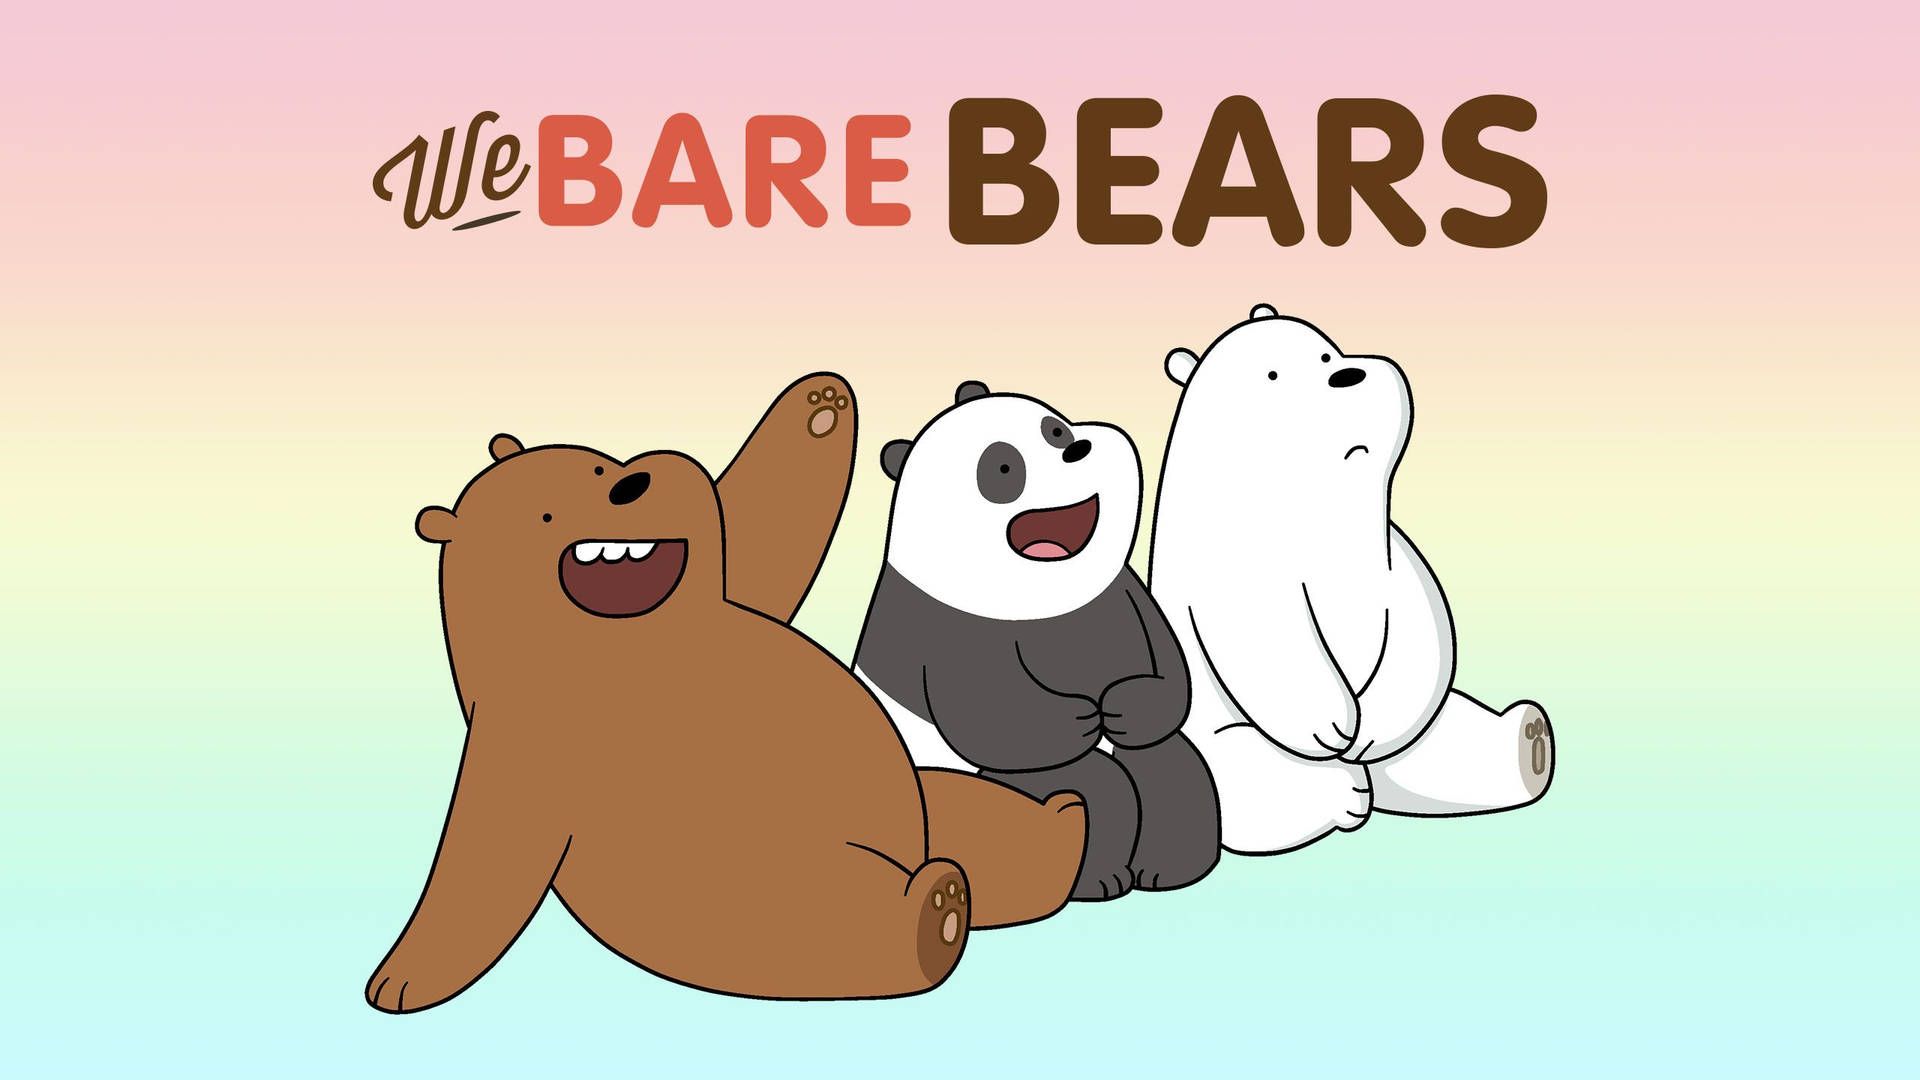 A poster for we bare bears - We Bare Bears